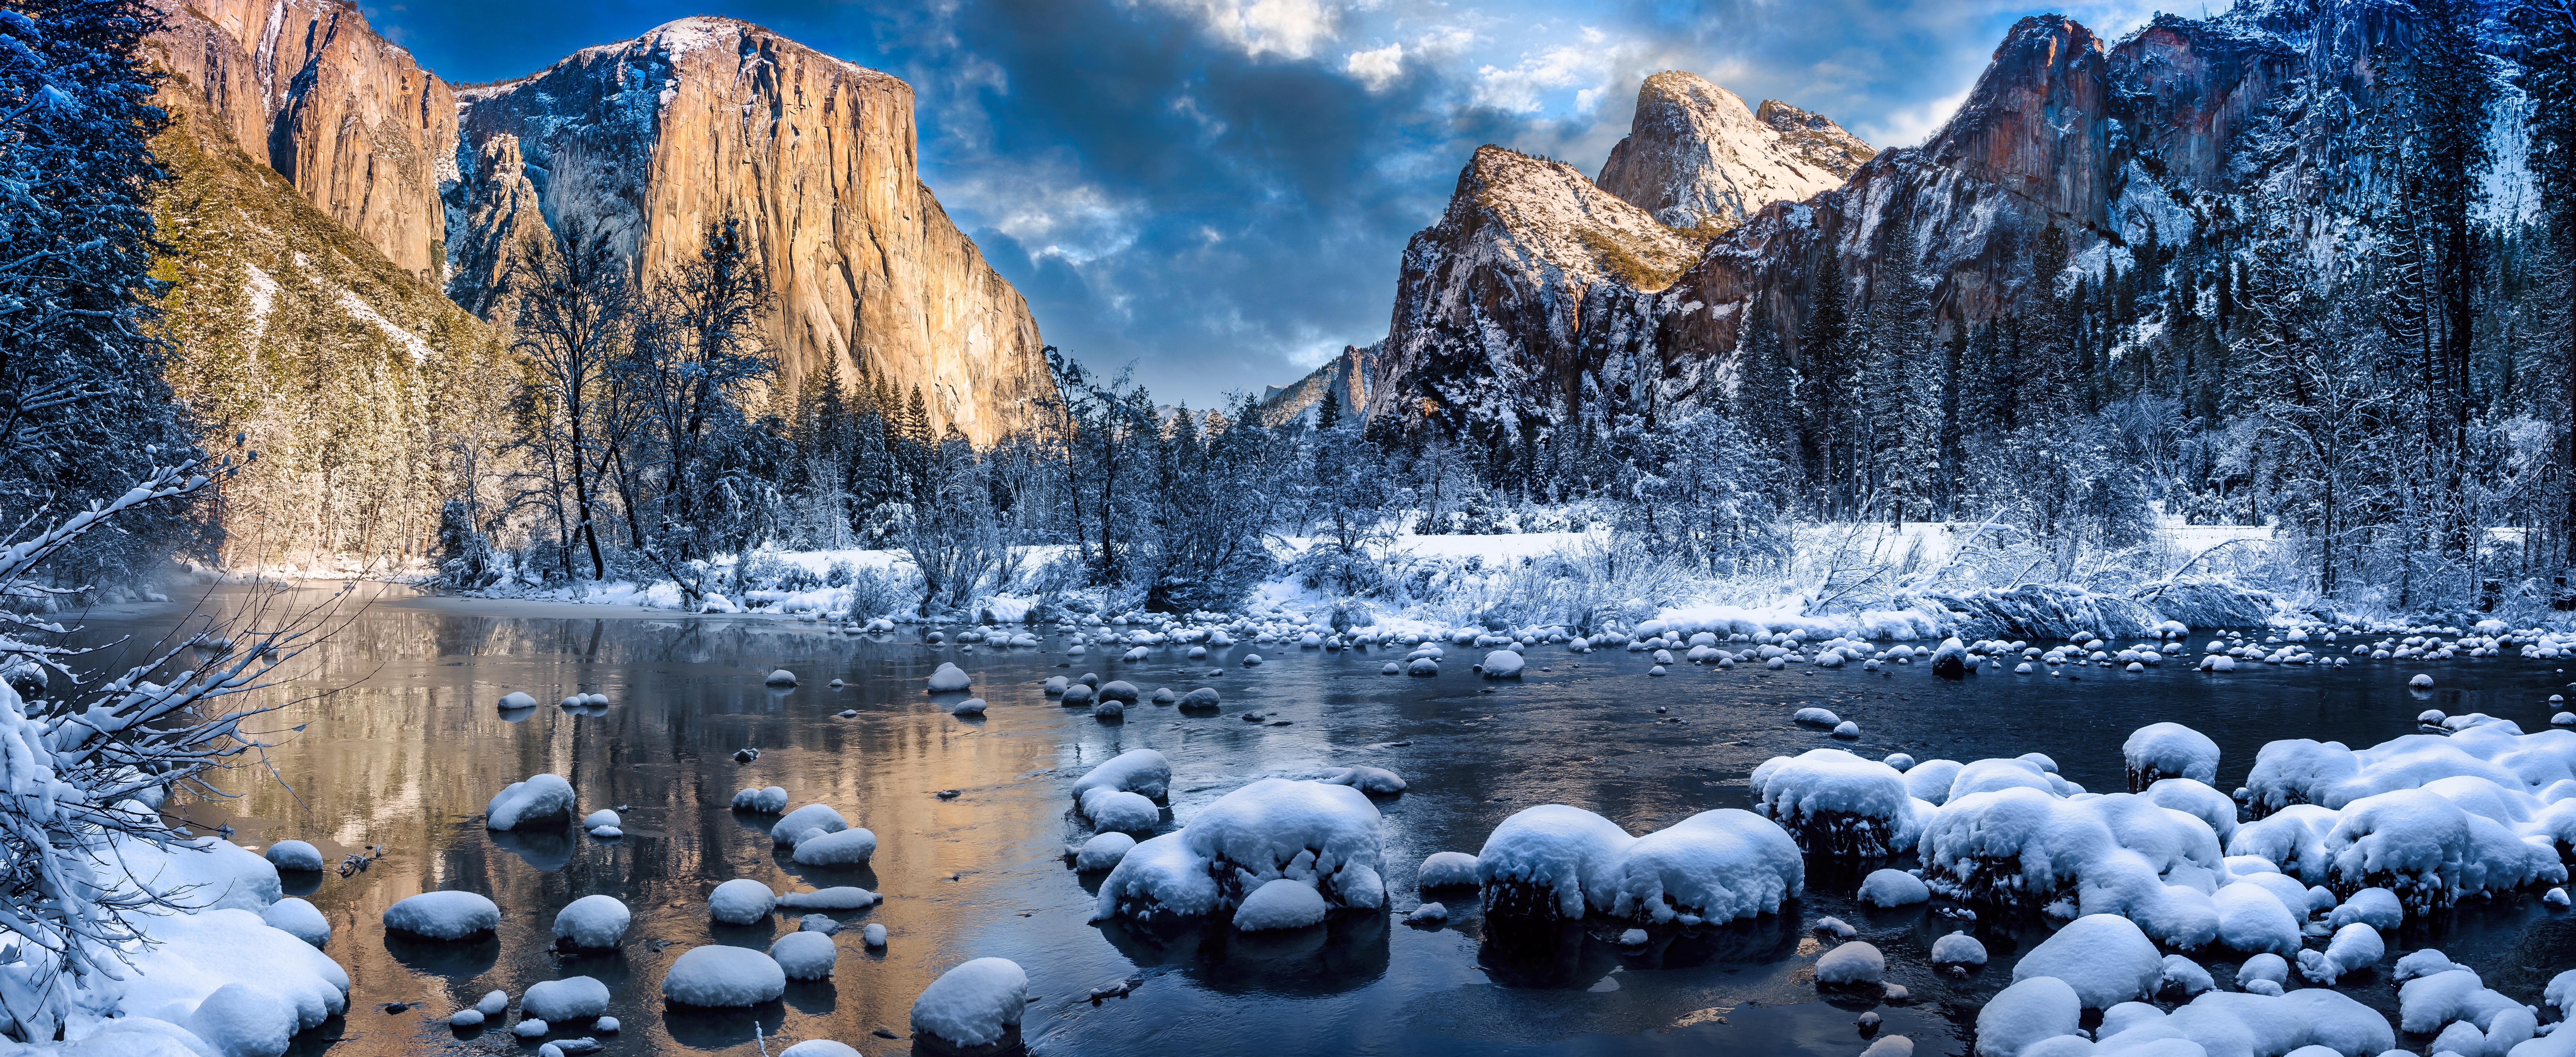 General 7846x3219 Yosemite National Park California USA winter river cliff rocks nature landscape forest trees El Capitan ultrawide snow sky water reflection clouds snow covered